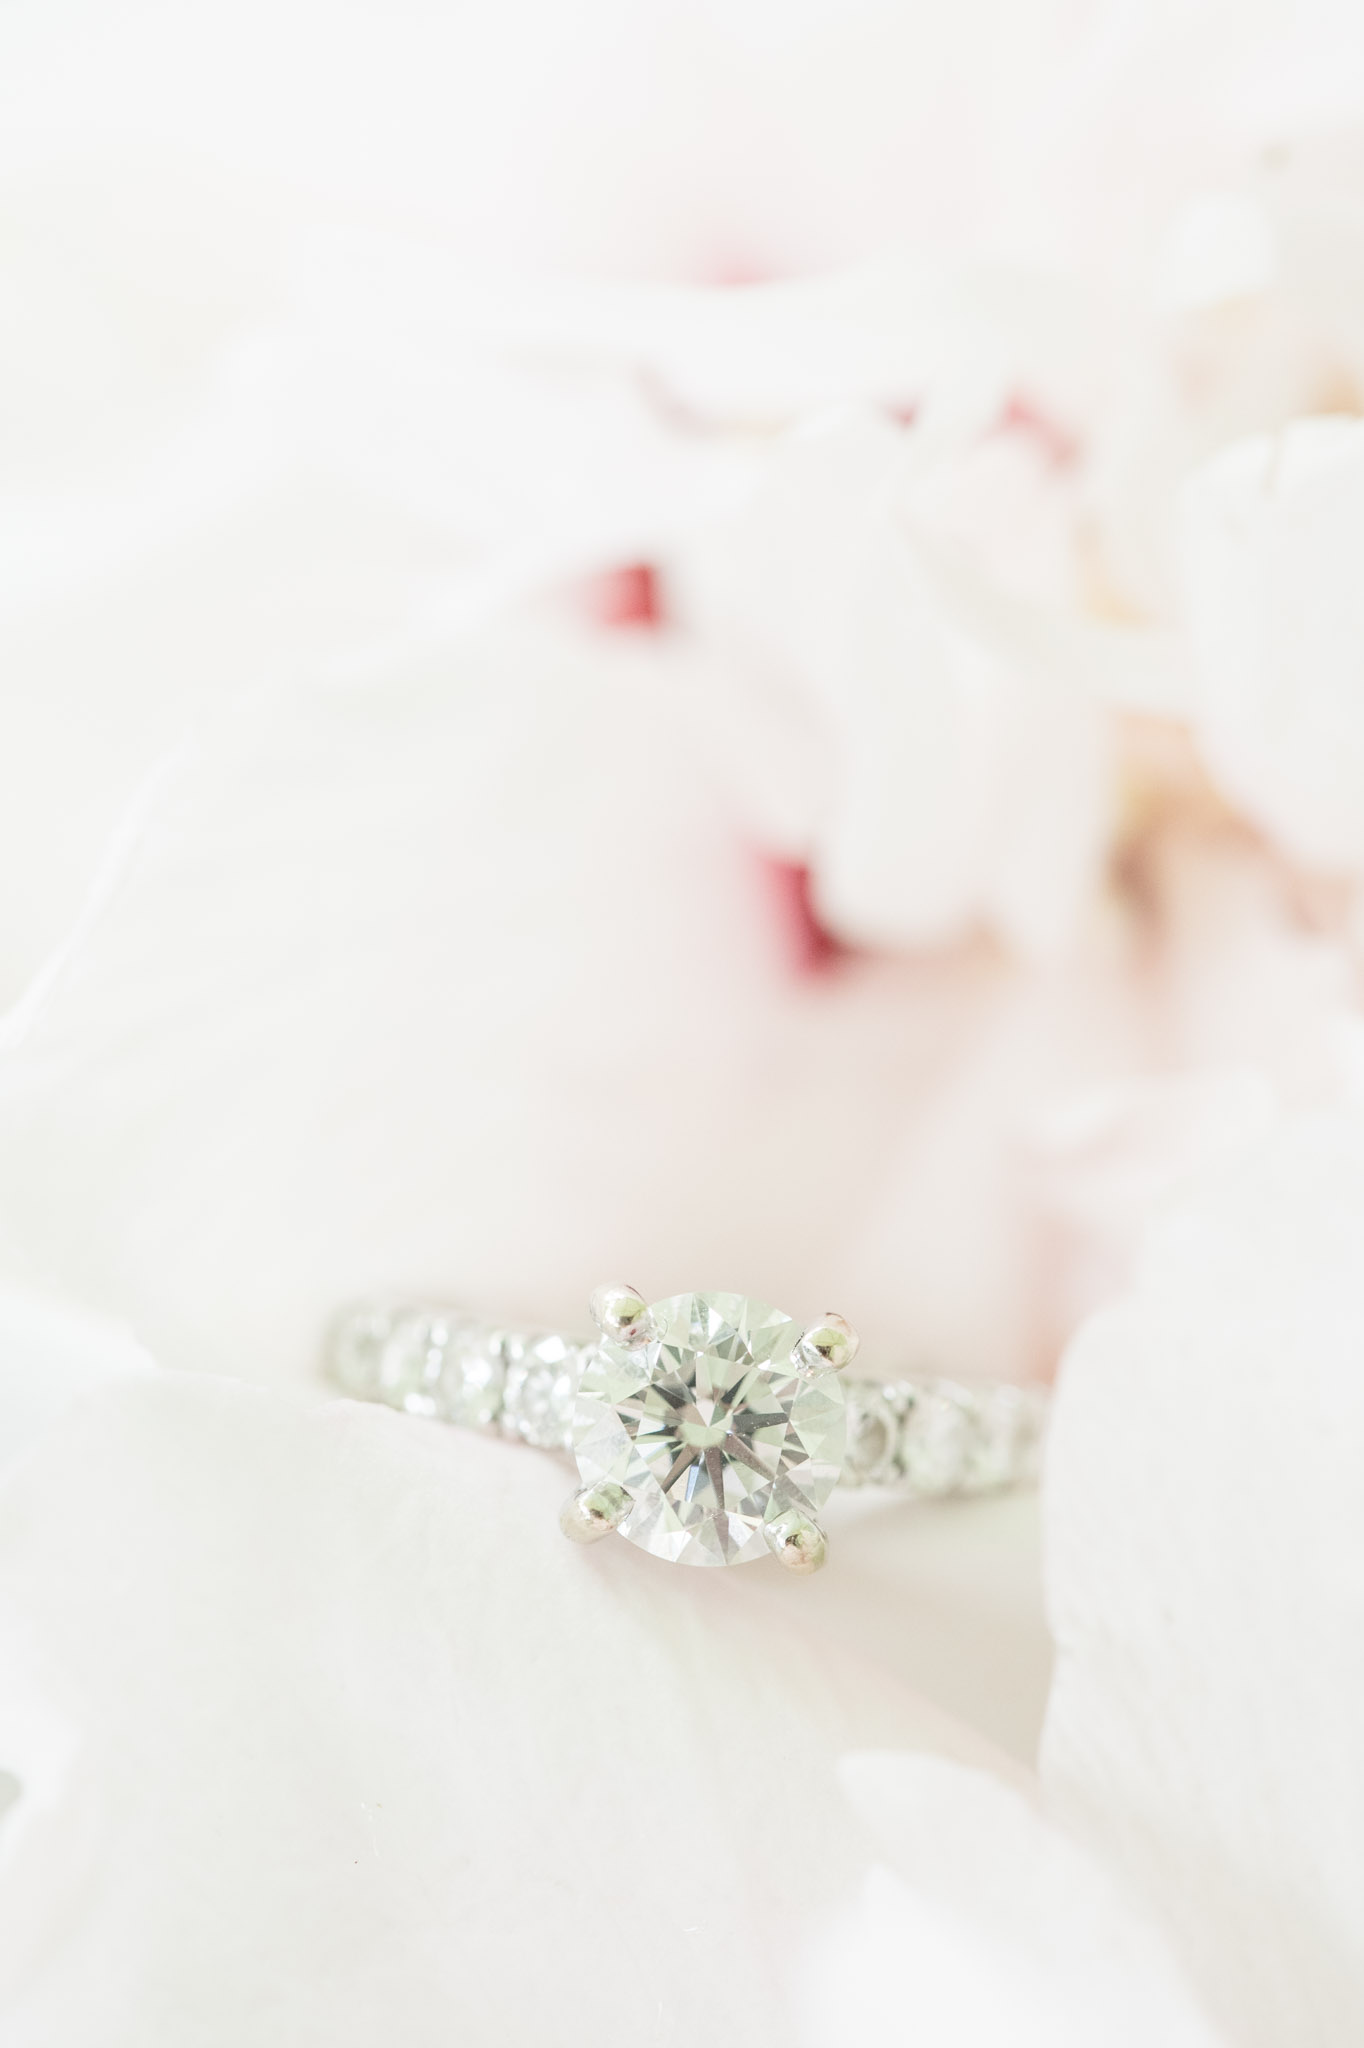 Engagement ring sits on flower petal.